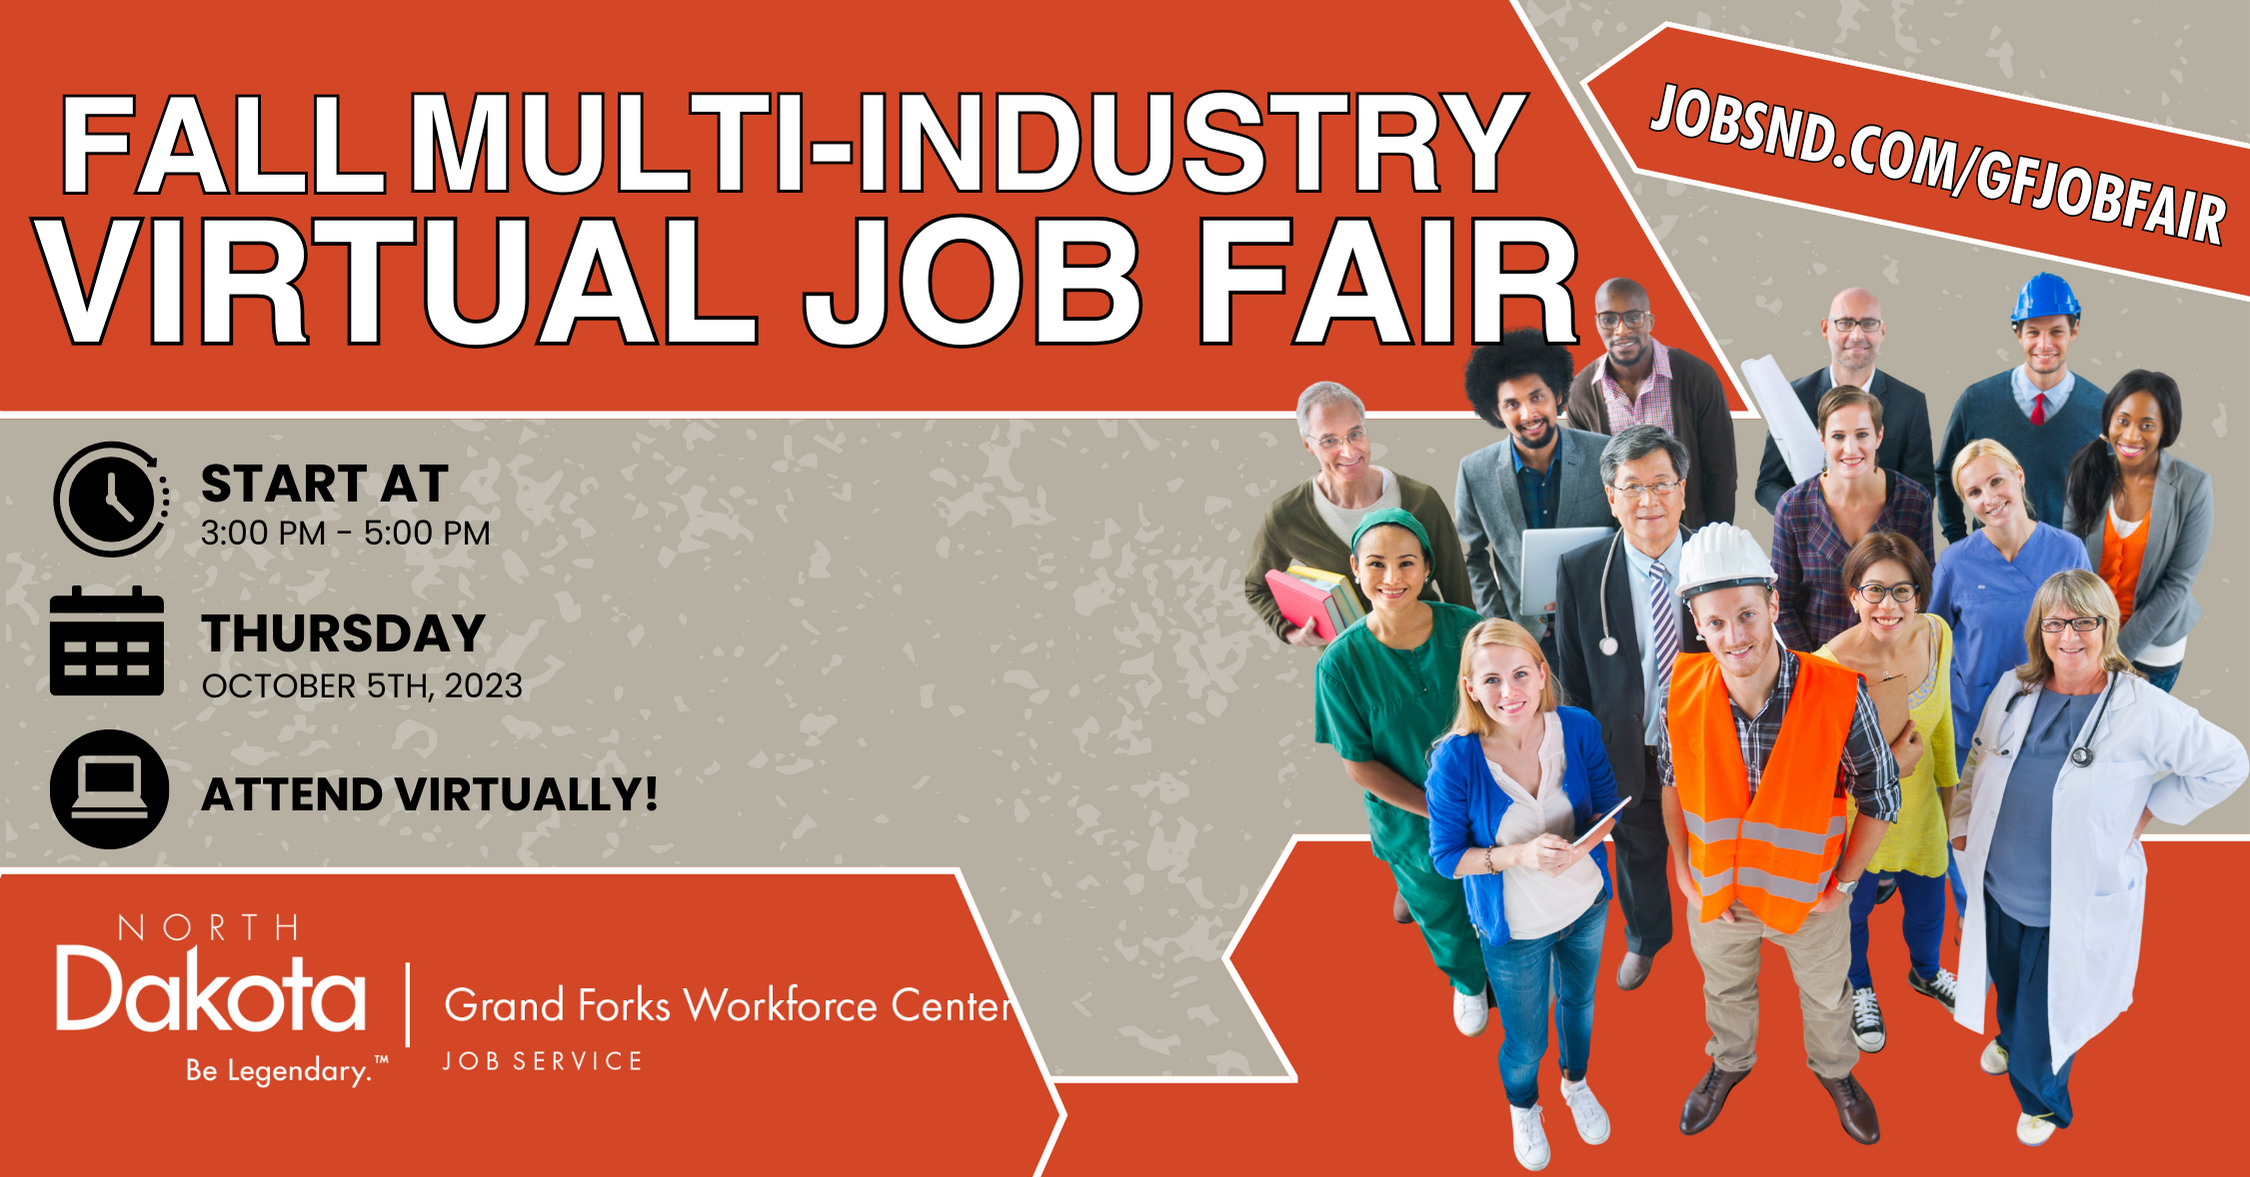 Graphic for the 2023 Fall Multi Industry Virtual Job Fair